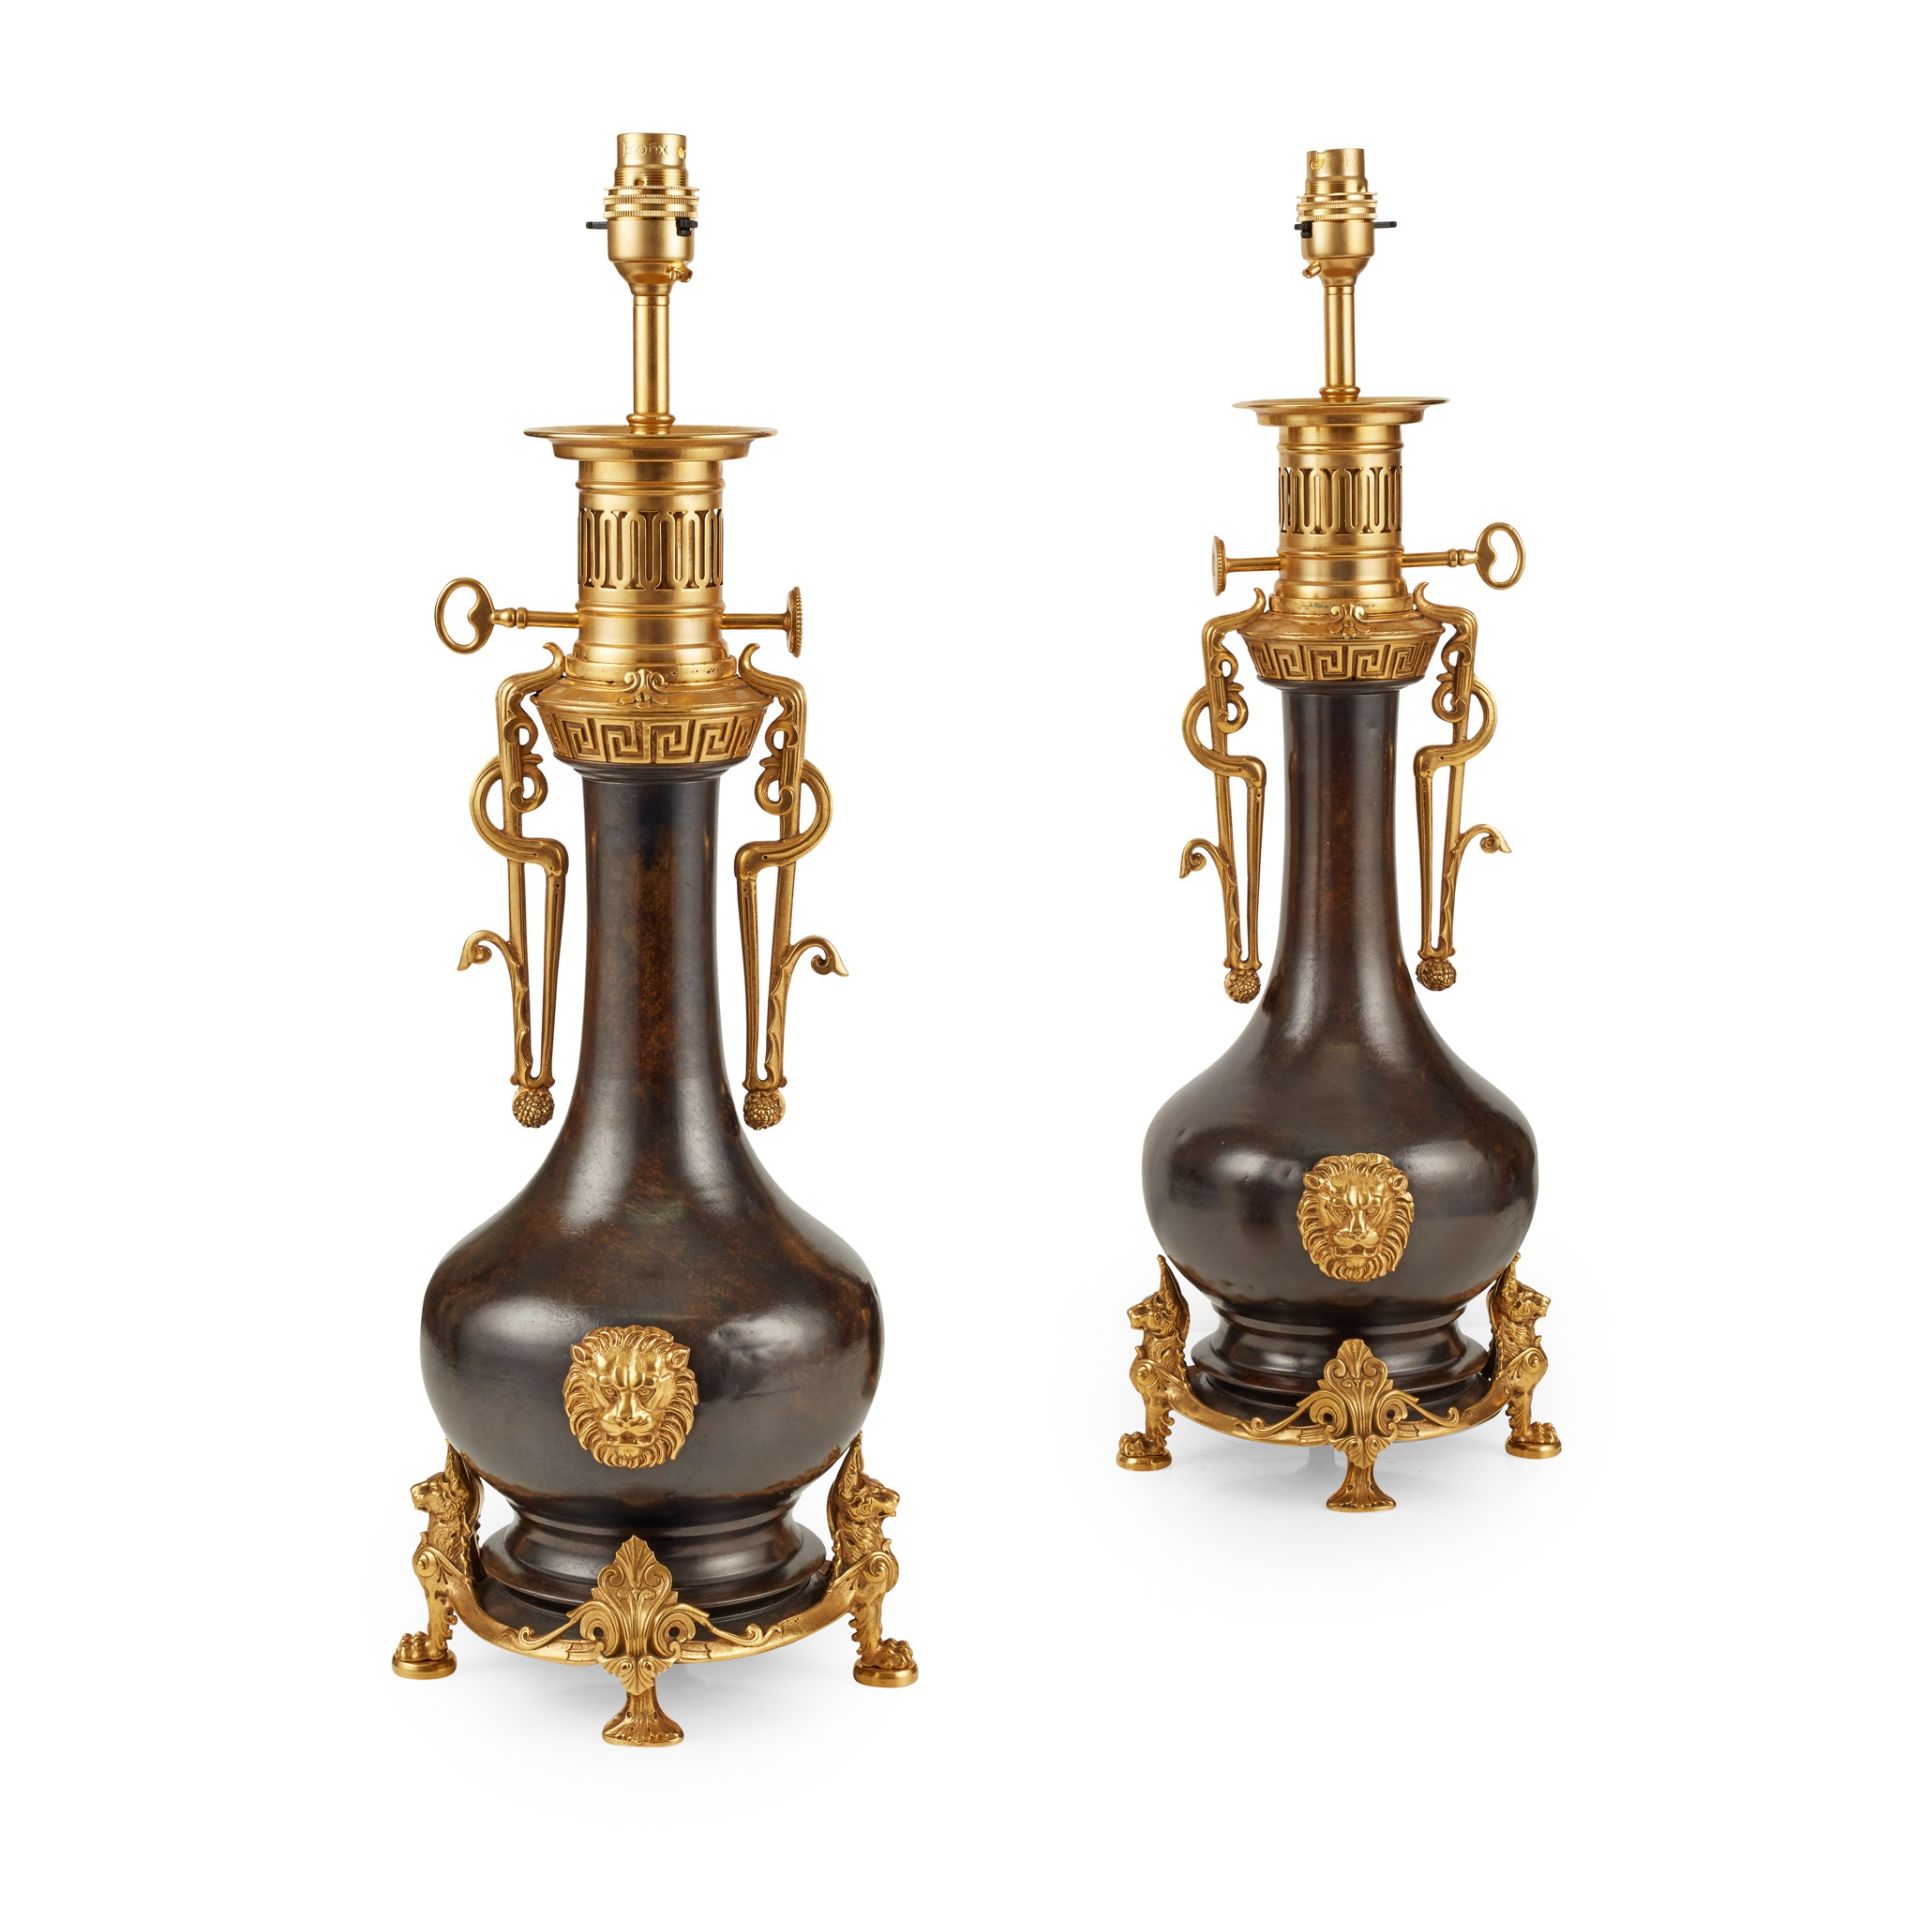 PAIR OF FRENCH GILT AND PATINATED BRONZE MODERATOR LAMPS 19TH CENTURY